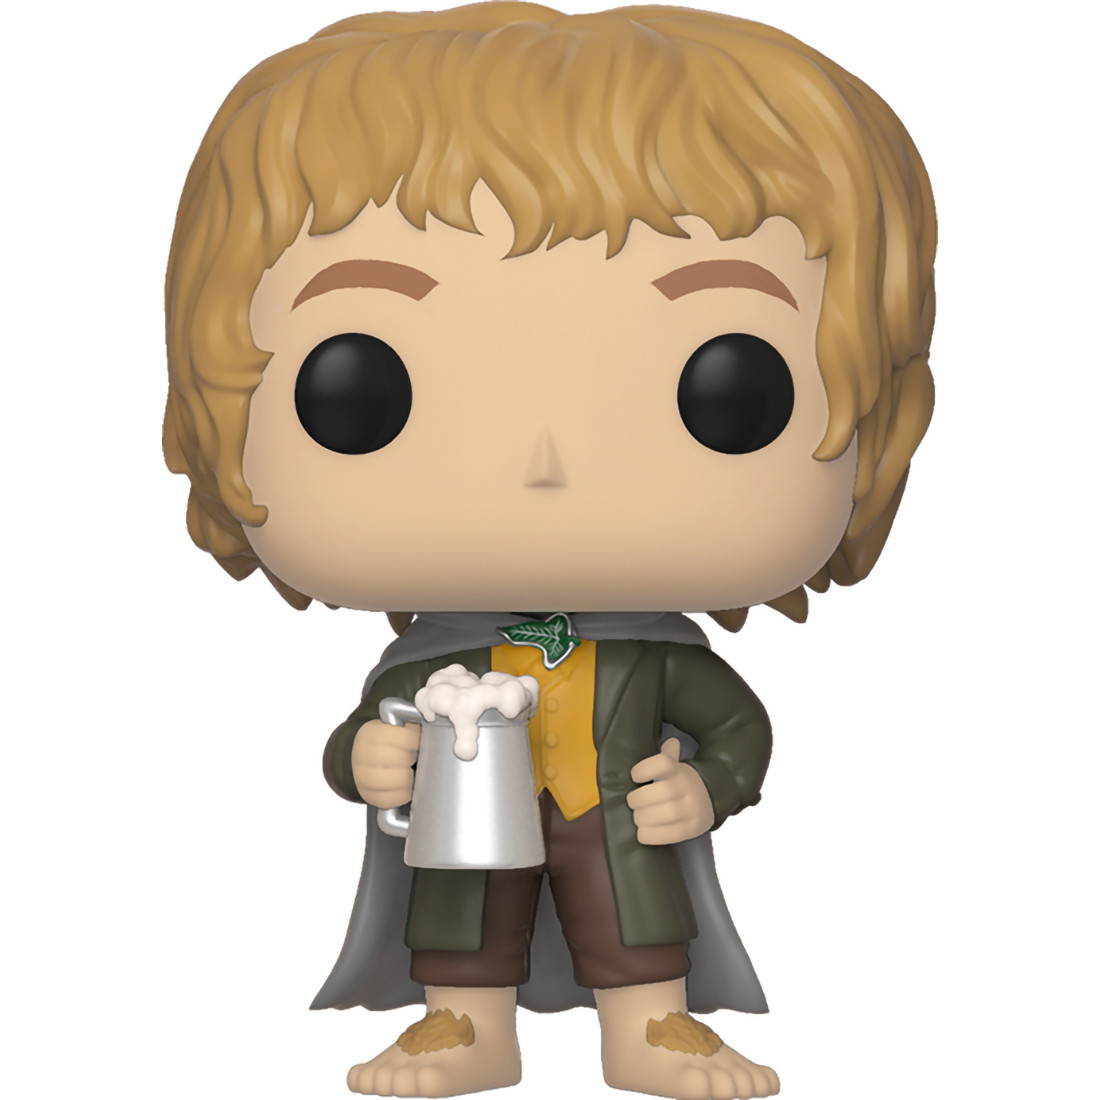 Funko Pop Movies Lord of The Rings Merry Brandybuck 528 Vinyl Figure 13563 for sale online 